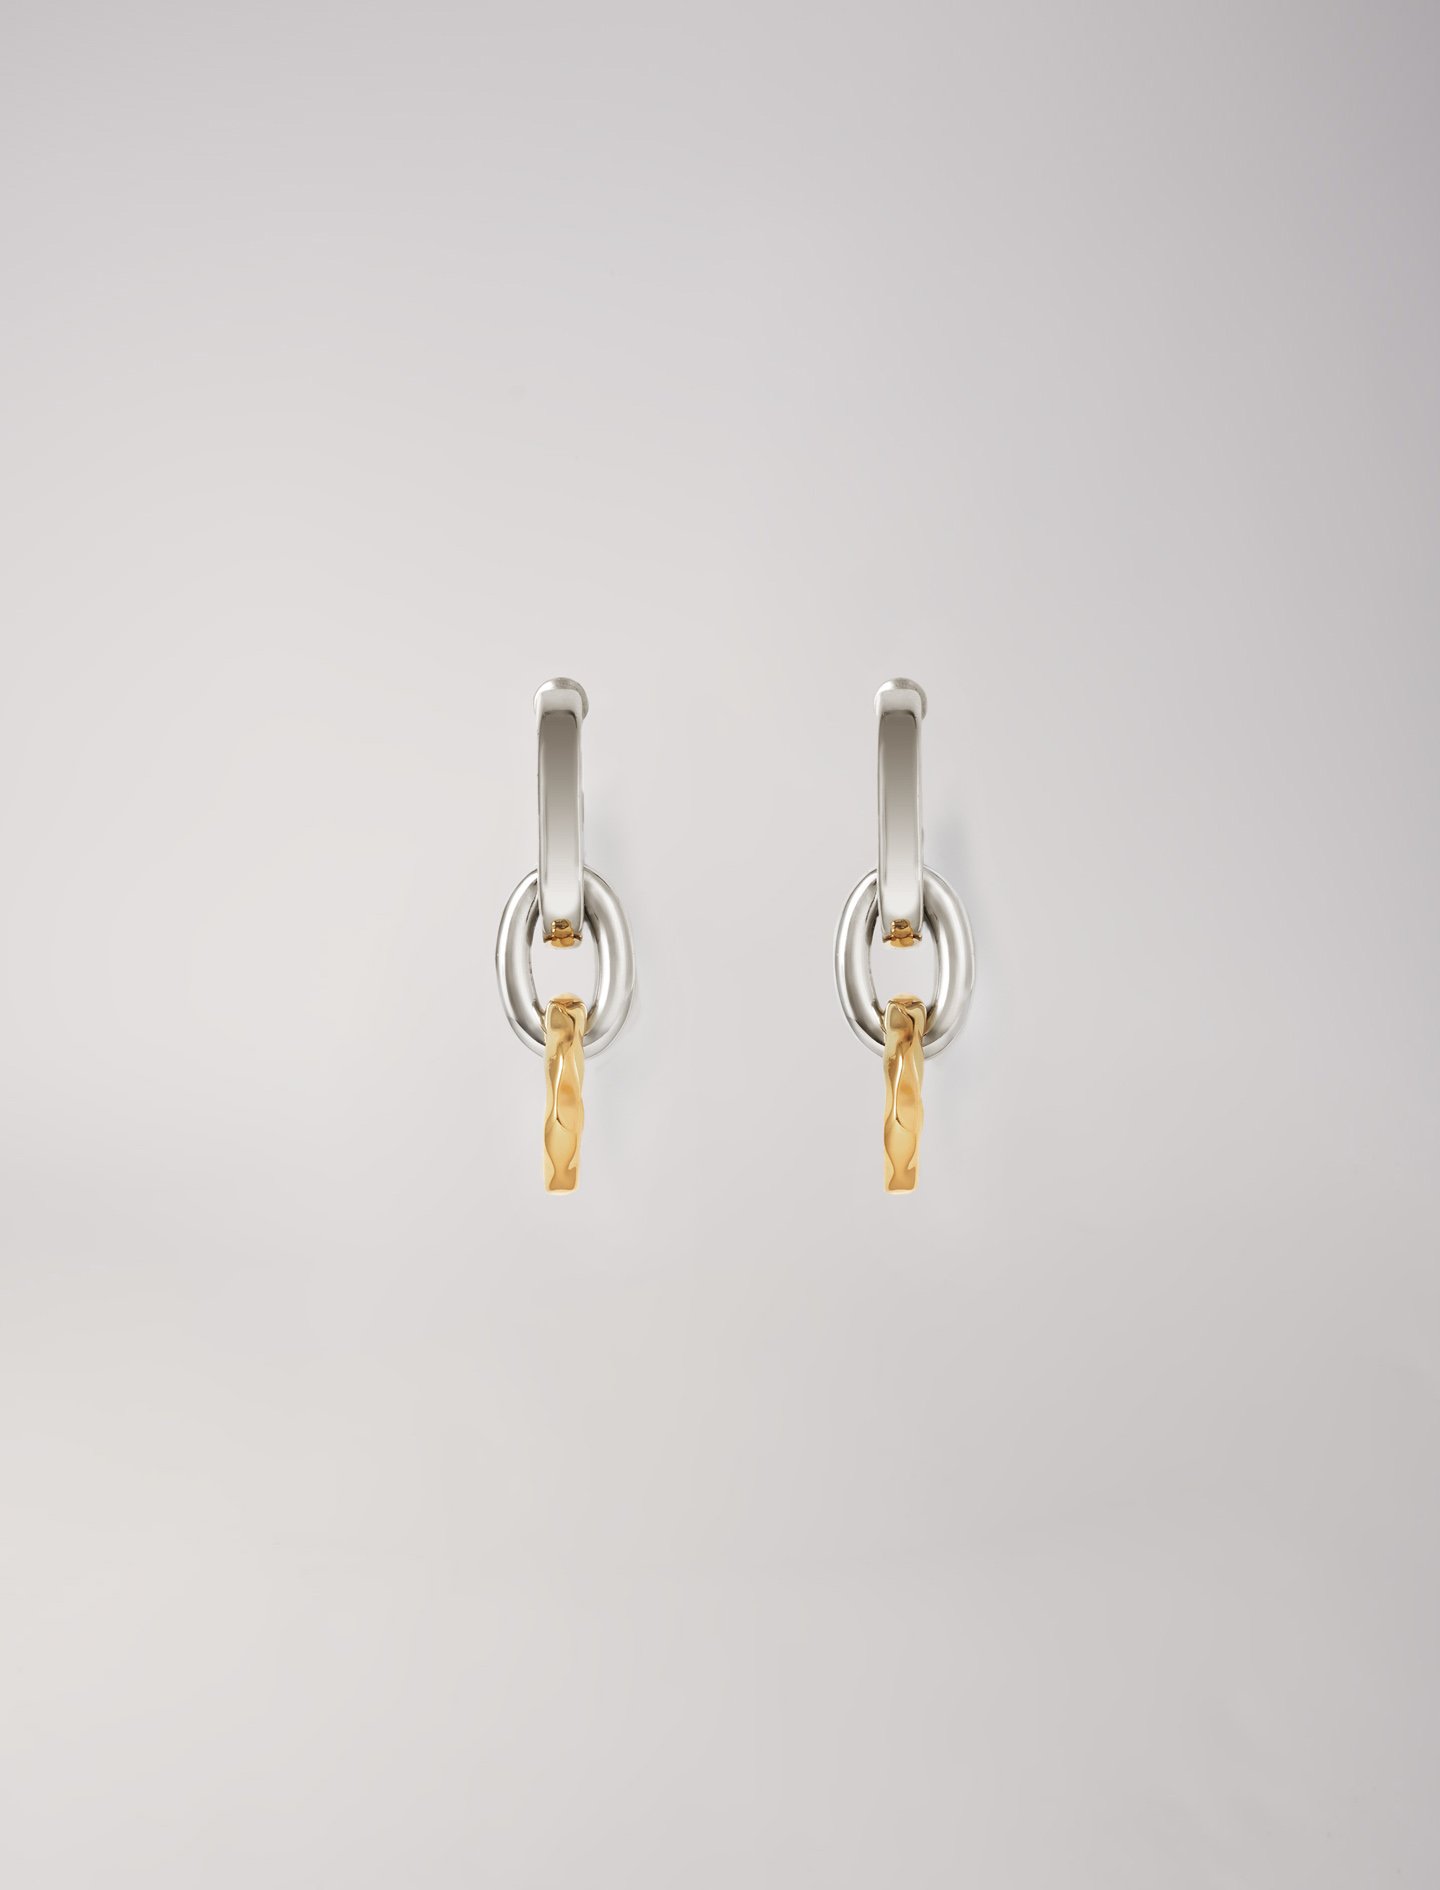 Mixte's brass Chain earring for Spring/Summer, size Mixte-Jewelry-OS (ONE SIZE), in color Silver/Gold /